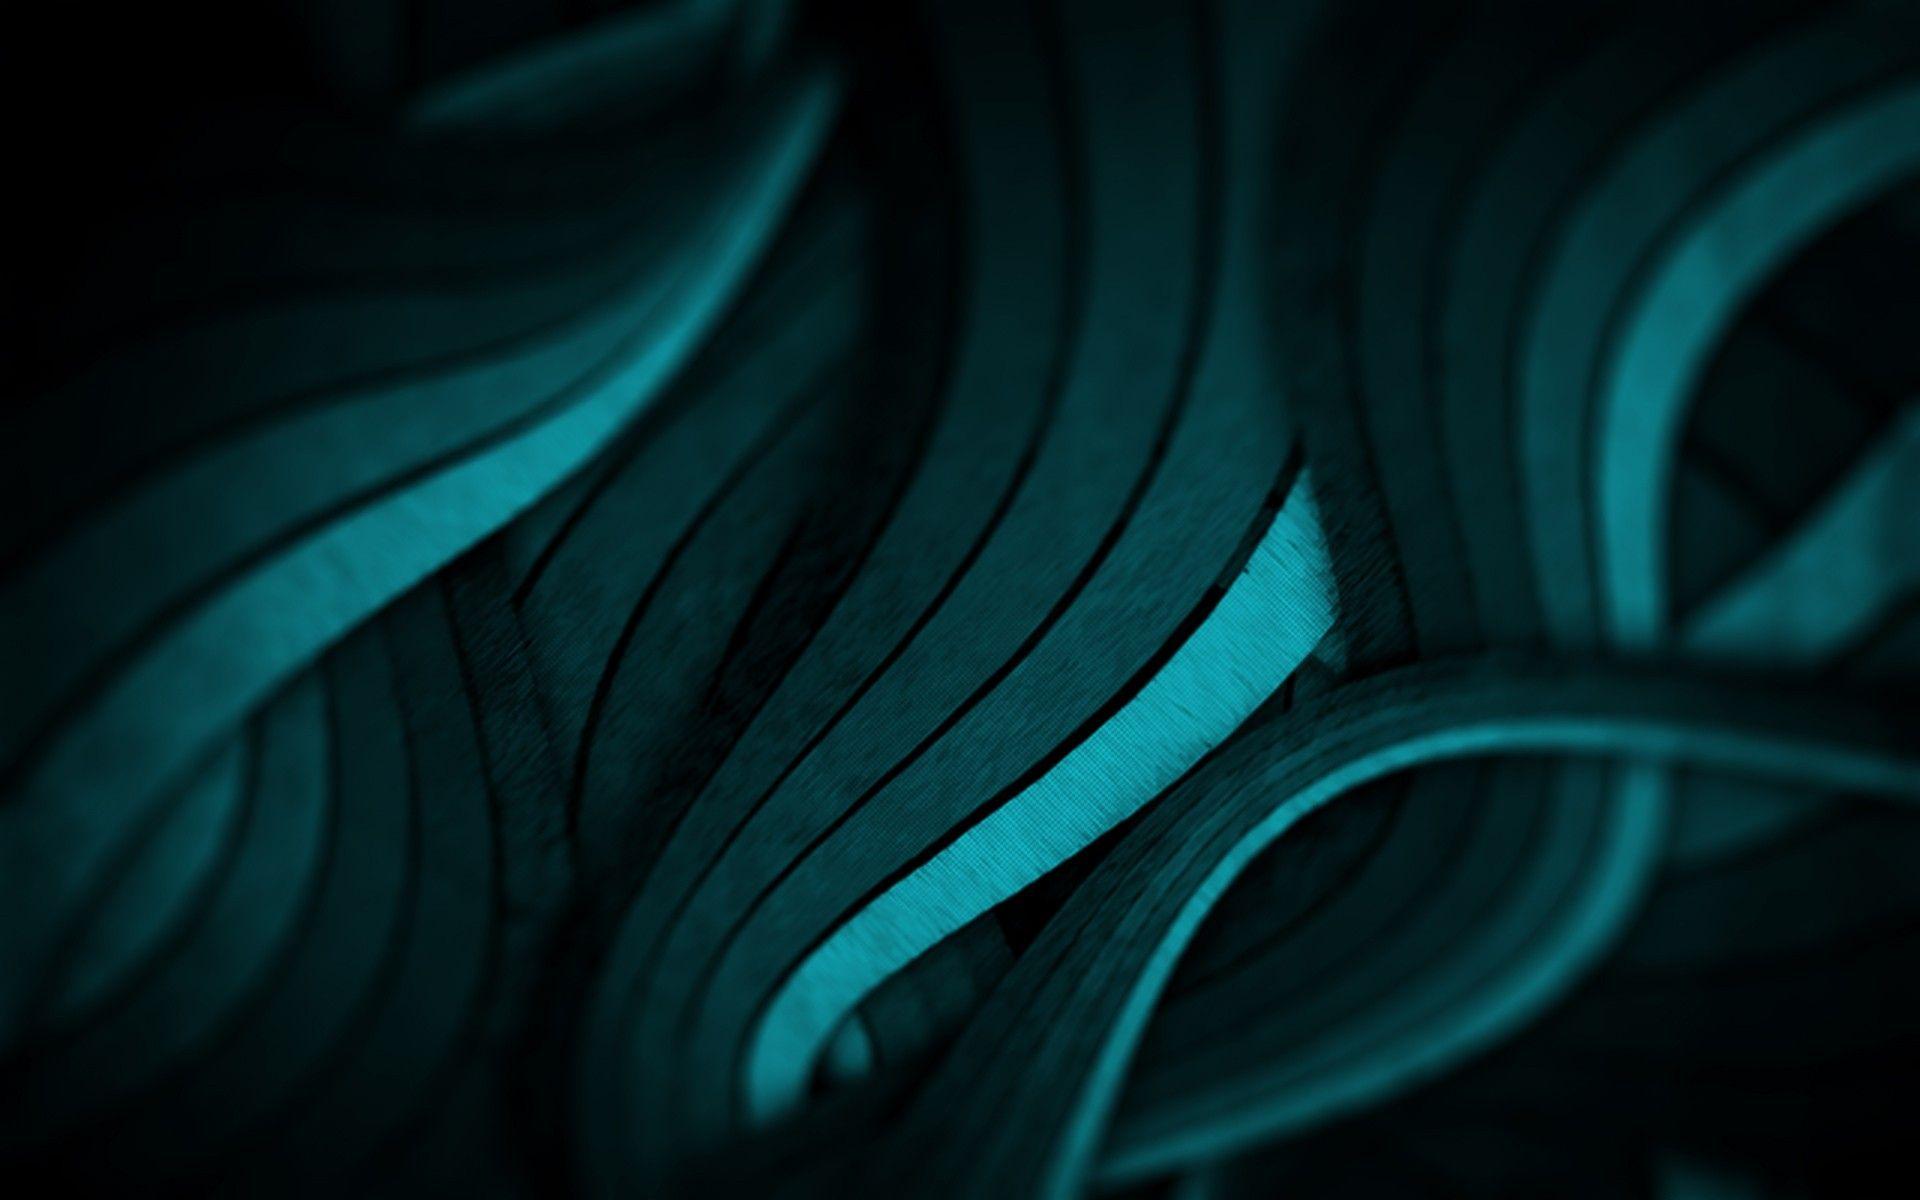 Turquoise Abstract Wallpapers - Top Free Turquoise Abstract Backgrounds ...